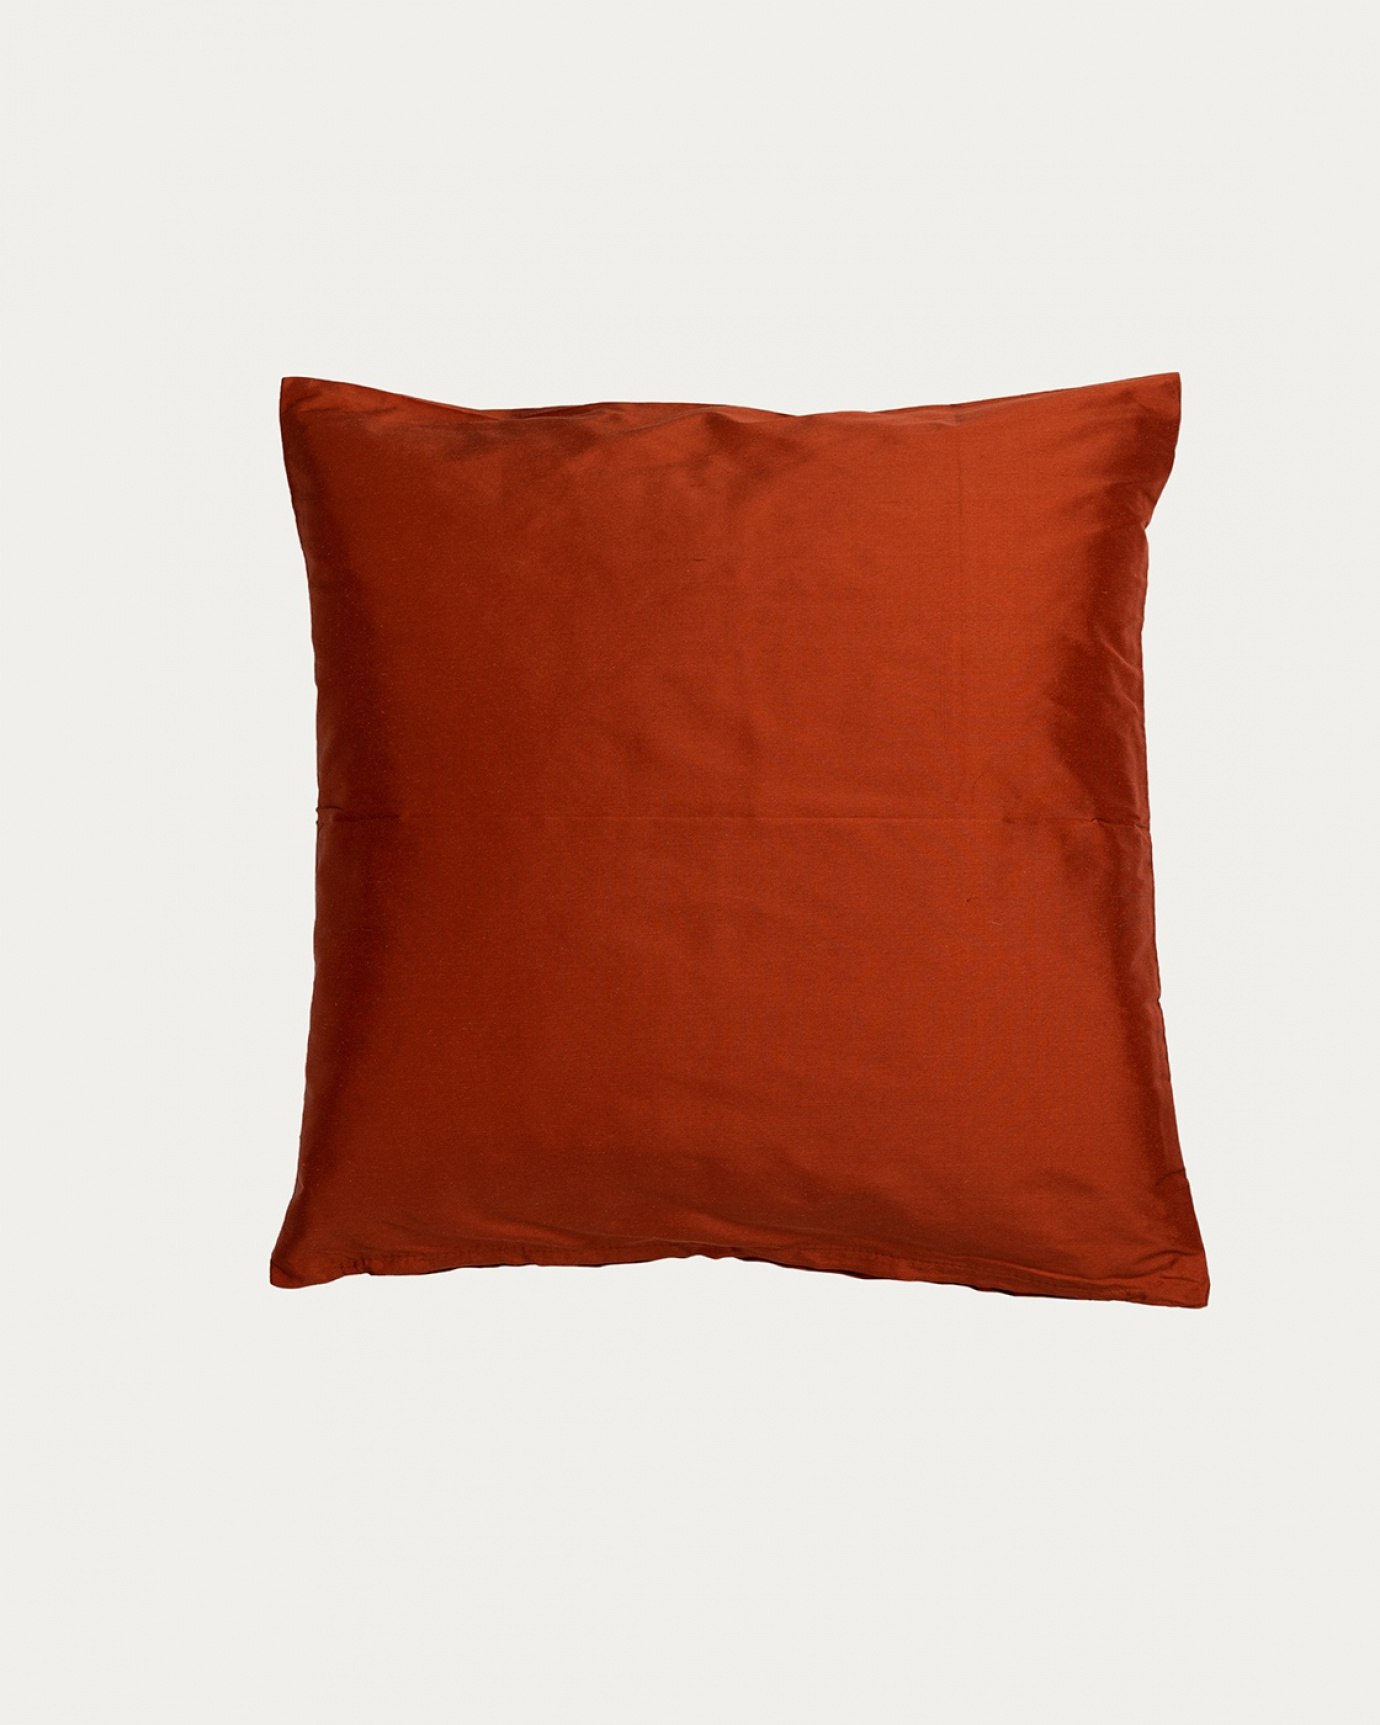 Product image rusty orange SILK cushion cover made of 100% dupion silk that gives a nice lustre from LINUM DESIGN. Size 40x40 cm.